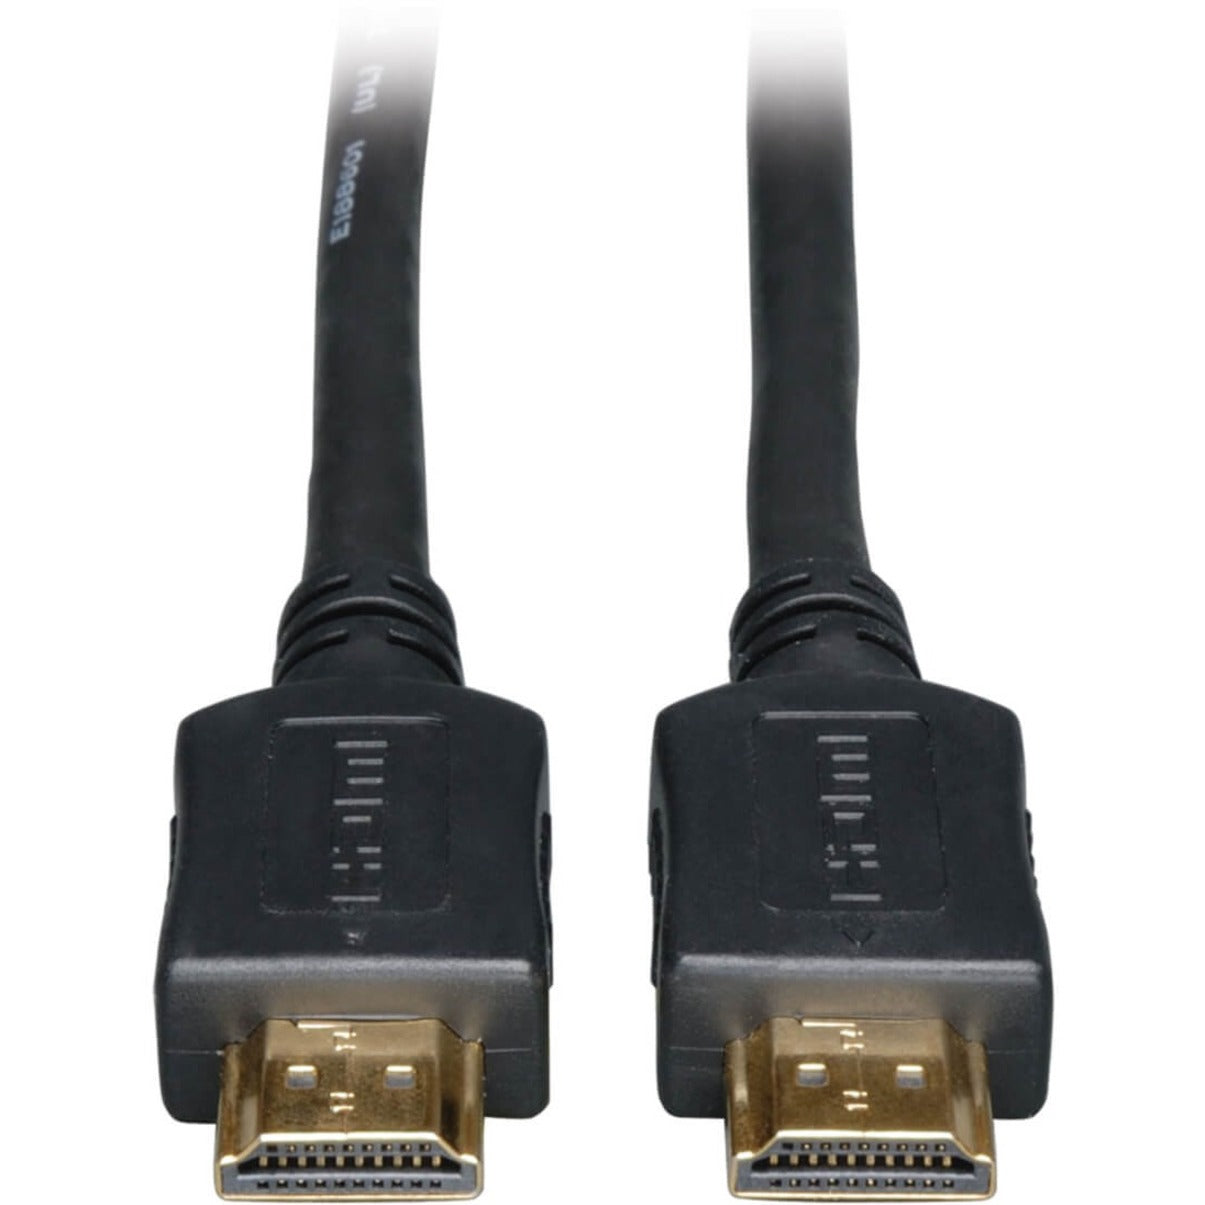 Tripp Lite P568-040-HD-CL2 High-Speed HDMI Cable, CL2 Rated, M/M, Black, 40 ft.